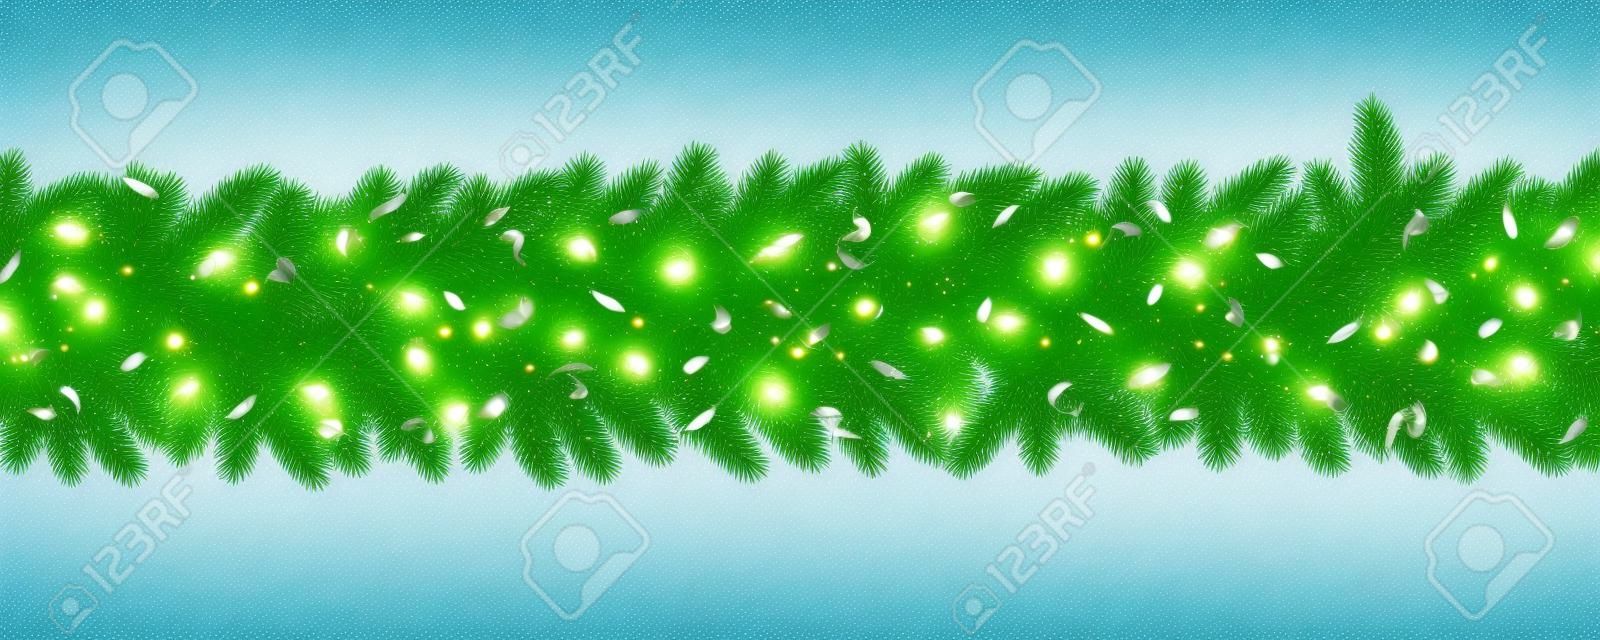 Christmas and New Year border of realistic branches of Christmas tree, garland light bulbs, serpentine Element for festive design isolated on transparent background Vector